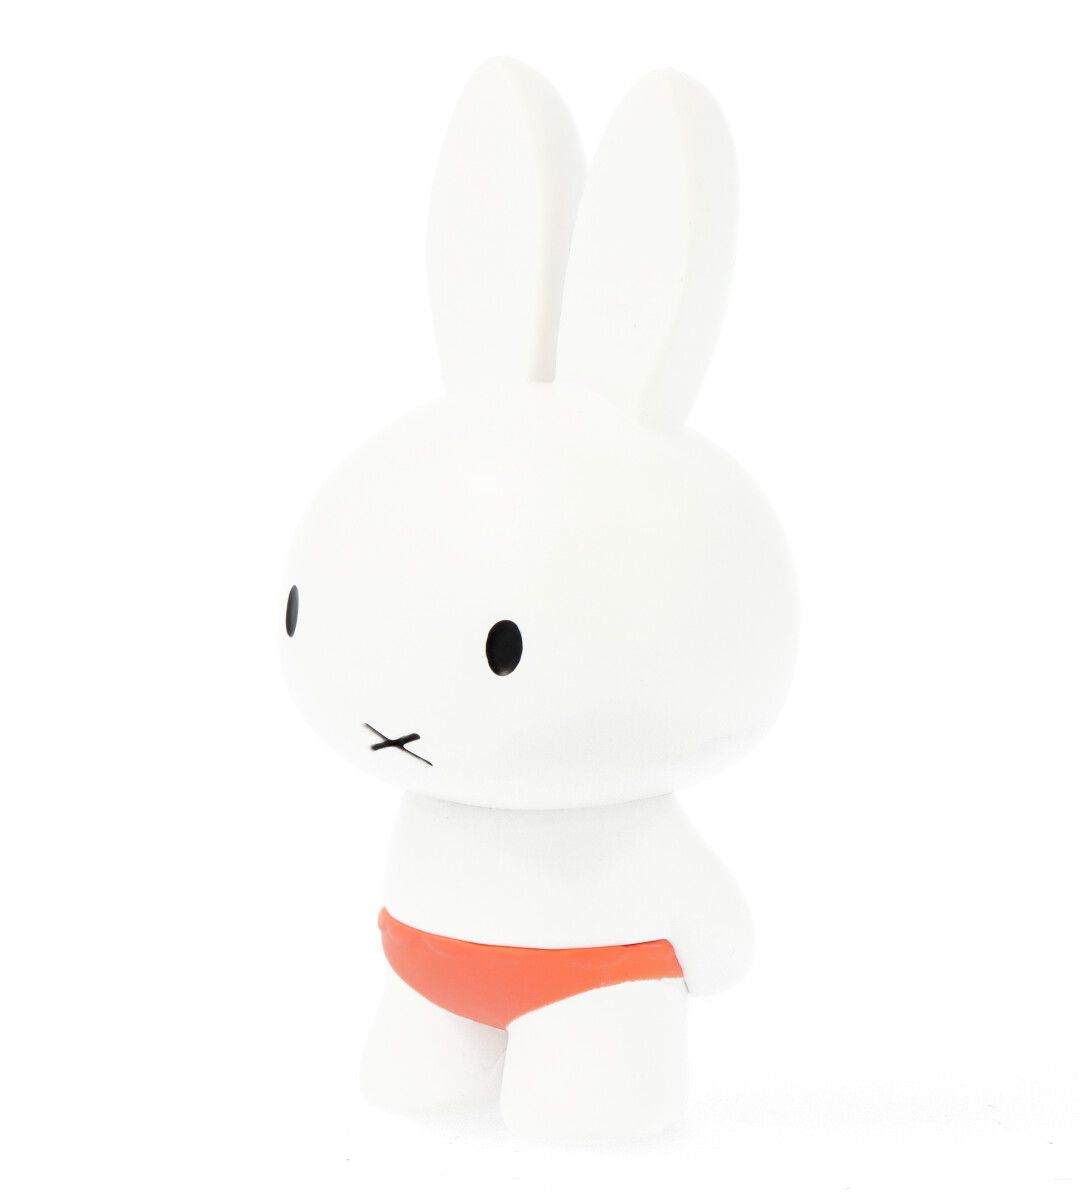 UDF Dick Bruna Series 3 - Miffy playing in water